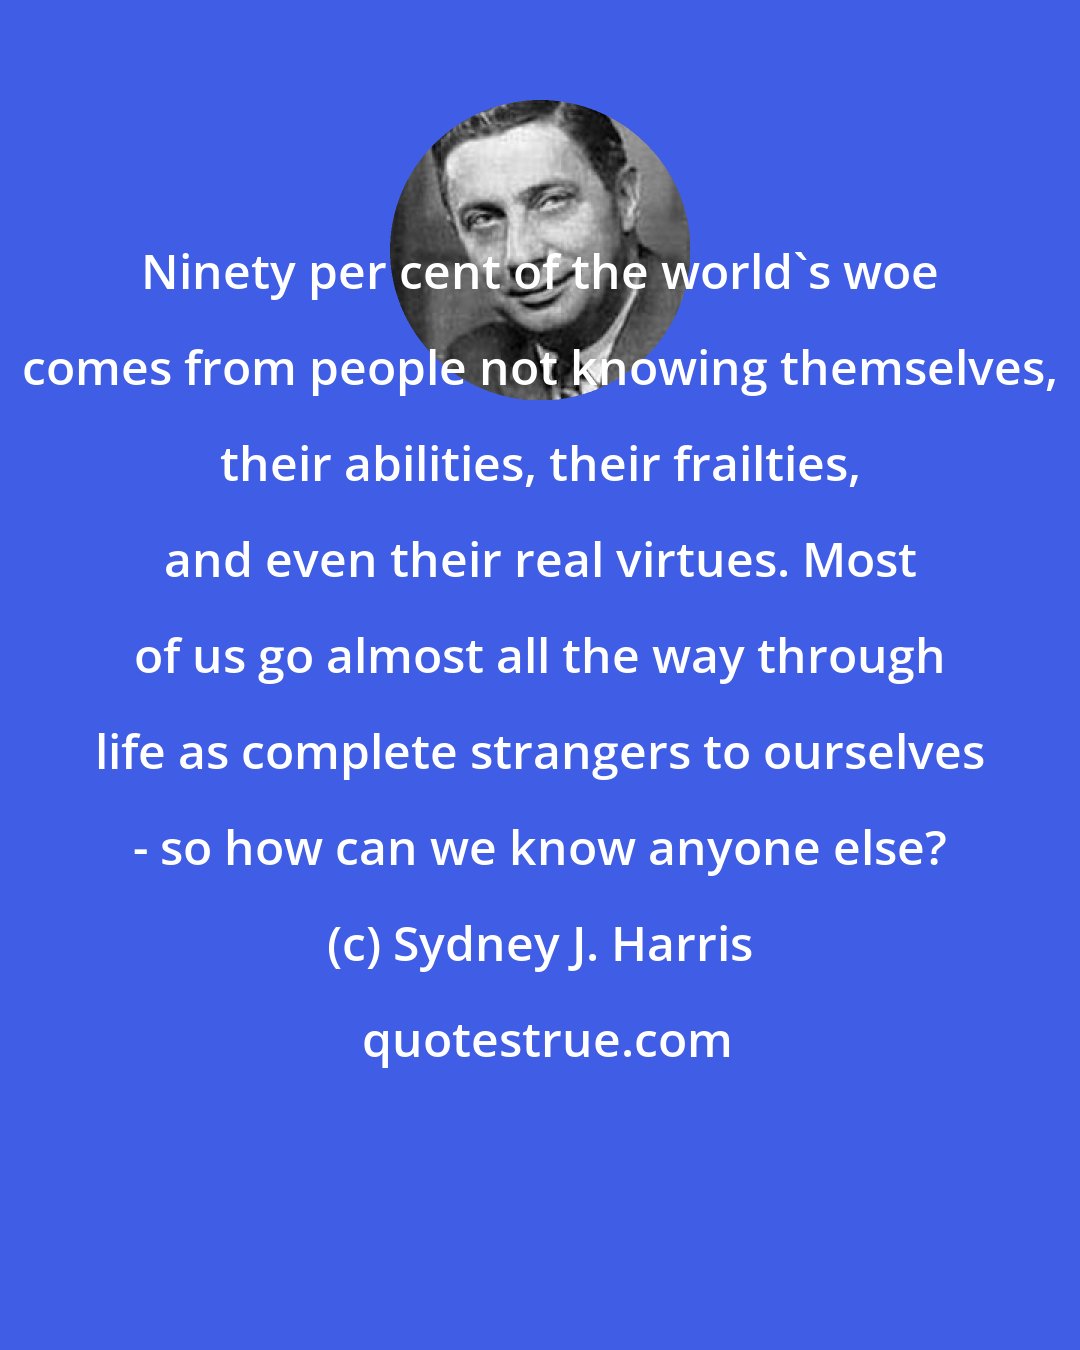 Sydney J. Harris: Ninety per cent of the world's woe comes from people not knowing themselves, their abilities, their frailties, and even their real virtues. Most of us go almost all the way through life as complete strangers to ourselves - so how can we know anyone else?